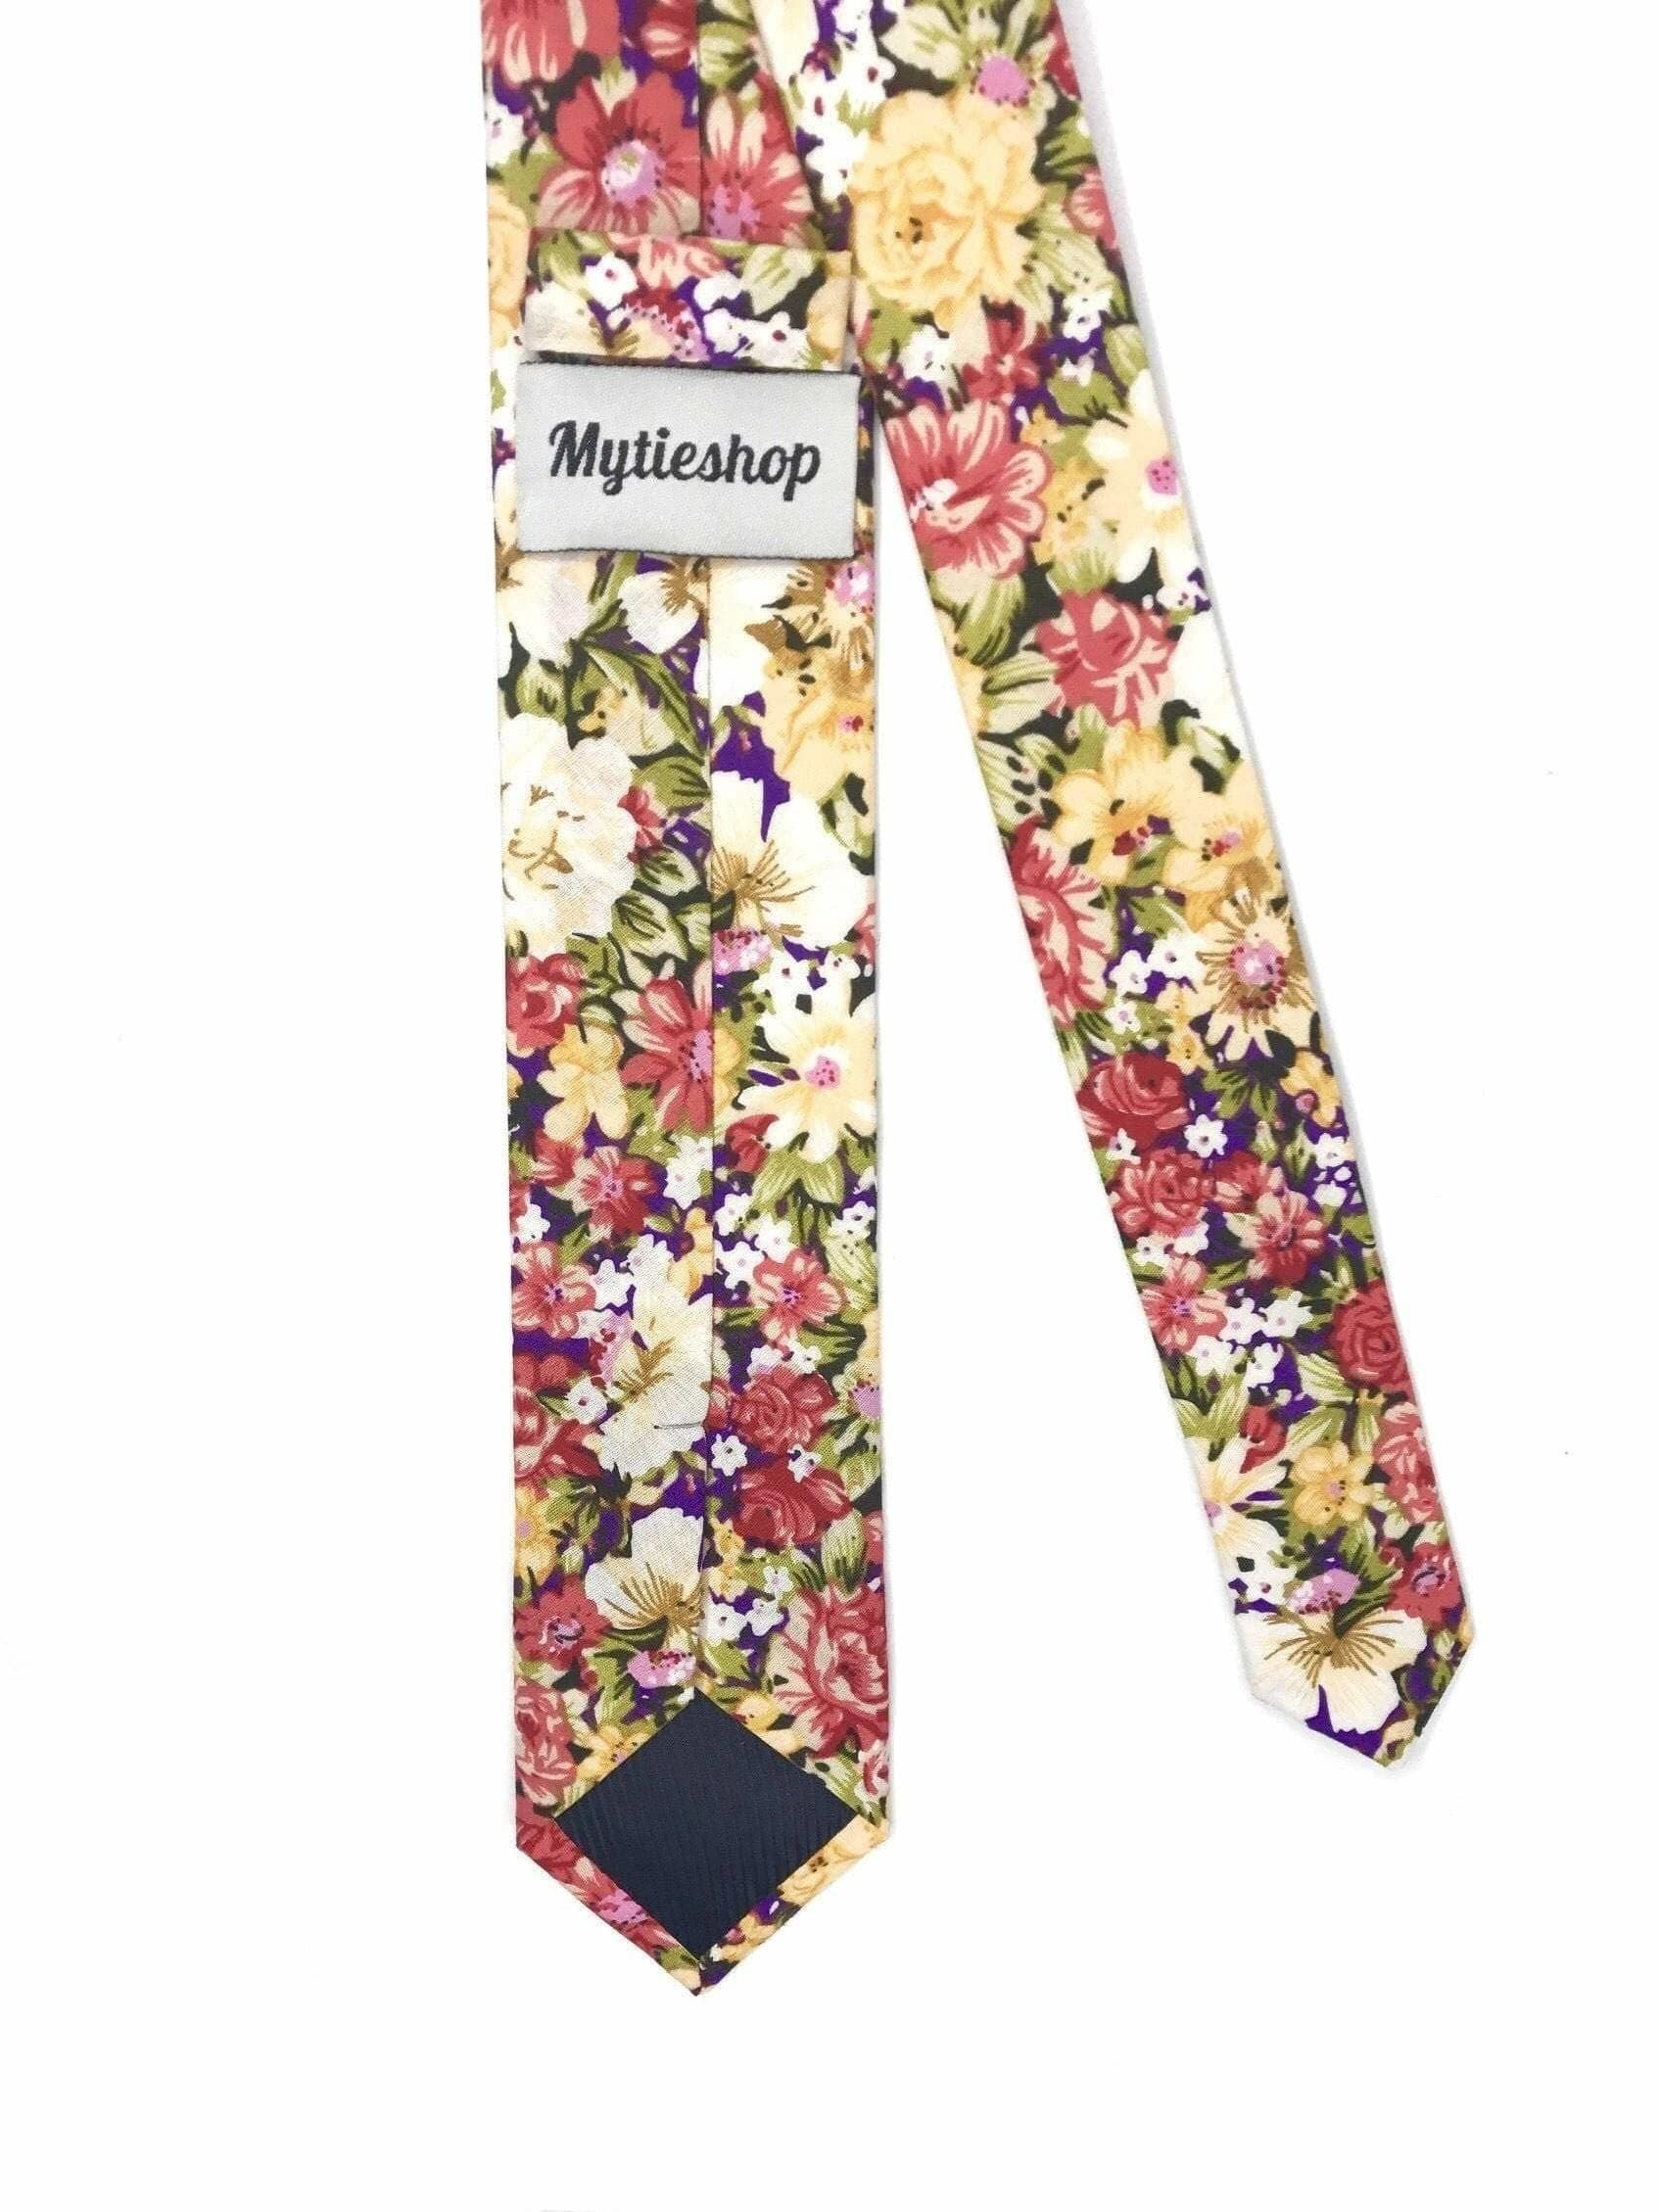 JACKSON Floral Skinny Tie 2.36&quot;-Neckties-JACKSON Floral Skinny Tie weddings and events, great for prom and anniversary gifts. Mens floral ties near me us ties tie shops cool ties-Mytieshop. Skinny ties for weddings anniversaries. Father of bride. Groomsmen. Cool skinny neckties for men. Neckwear for prom, missions and fancy events. Gift ideas for men. Anniversaries ideas. Wedding aesthetics. Flower ties. Dry flower ties.